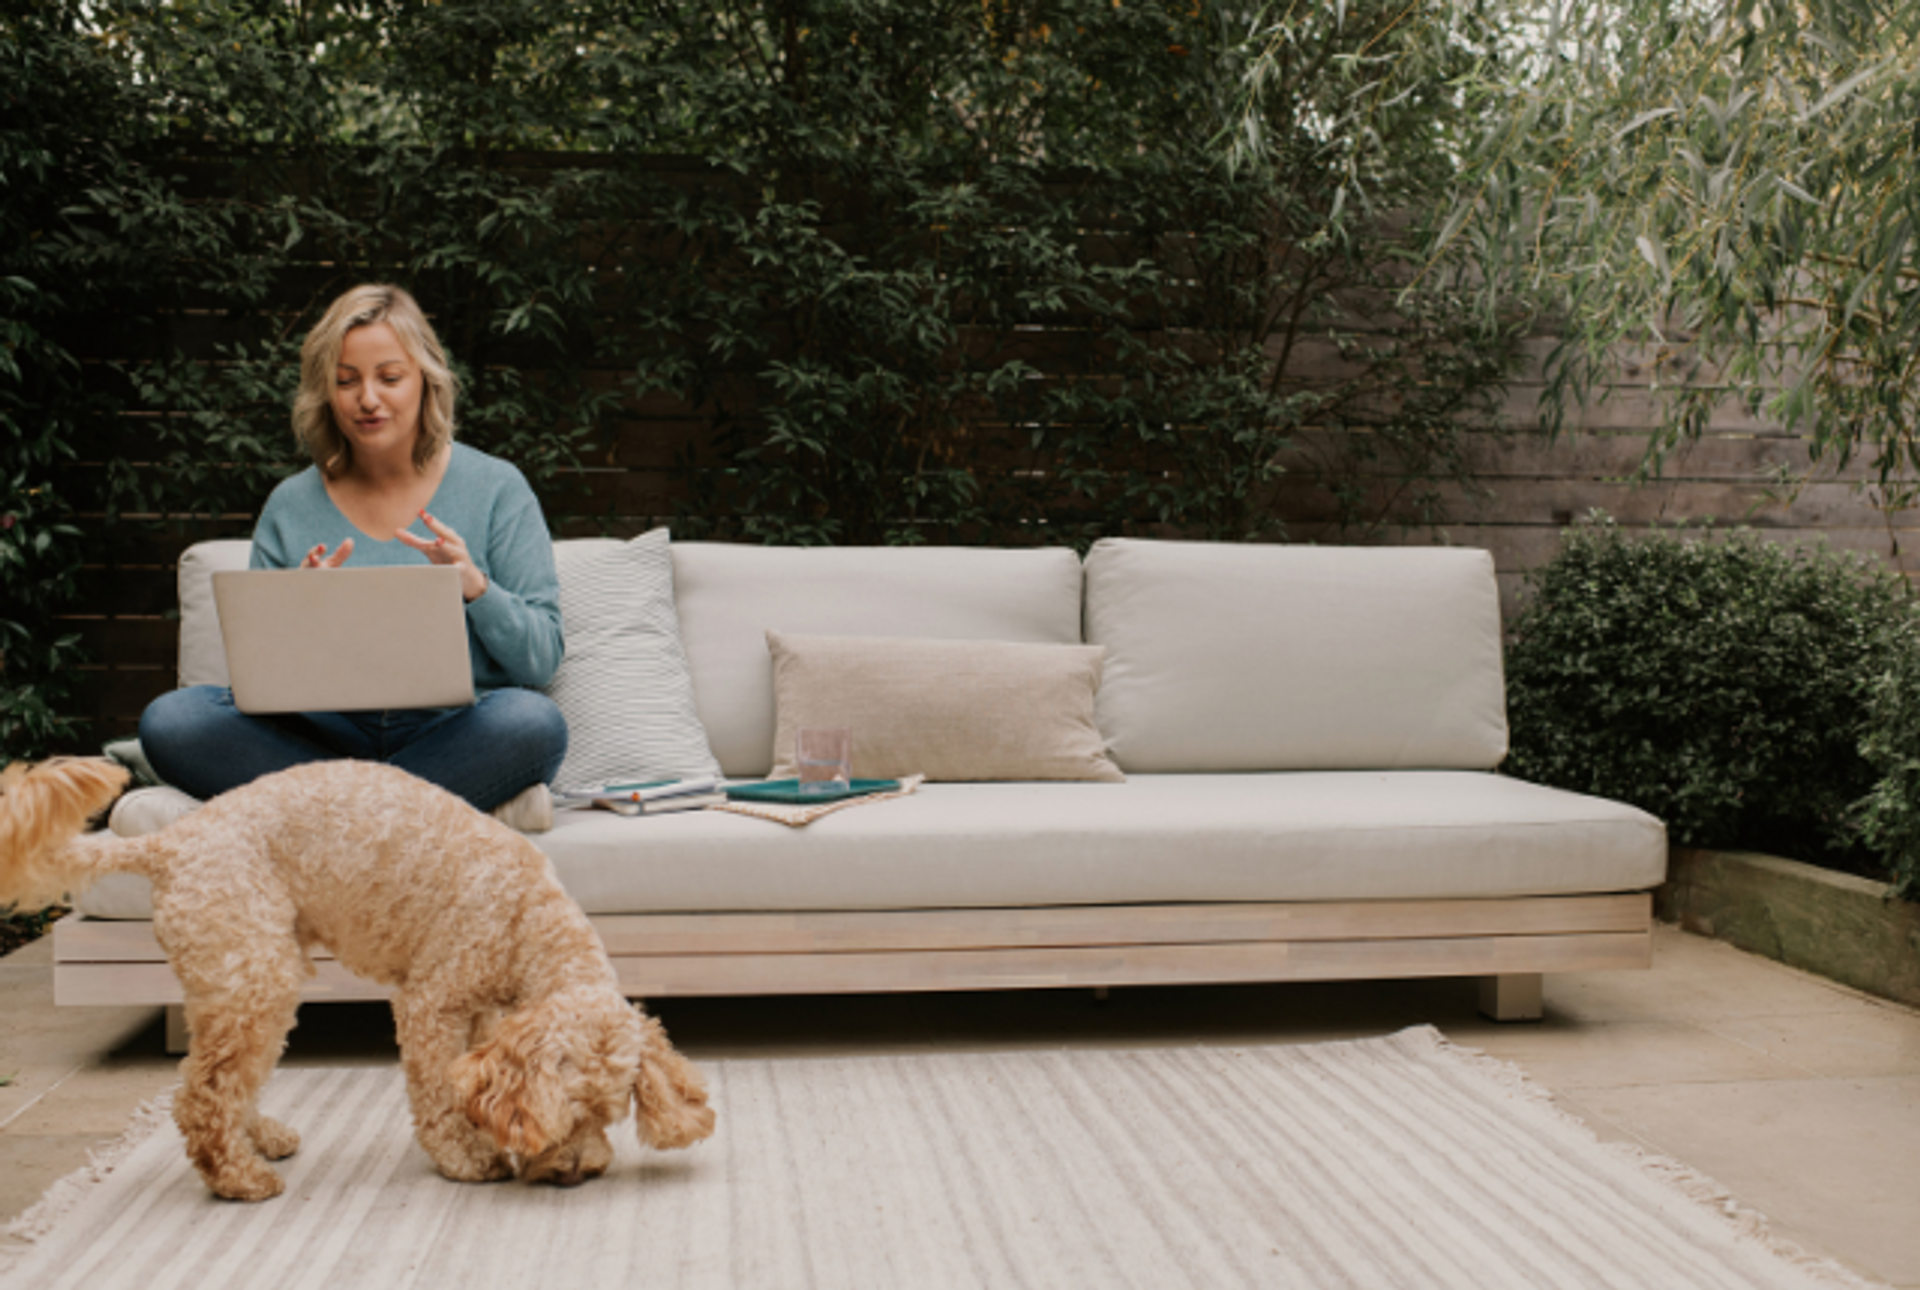 Woman working on her laptop in a garden with a dog 